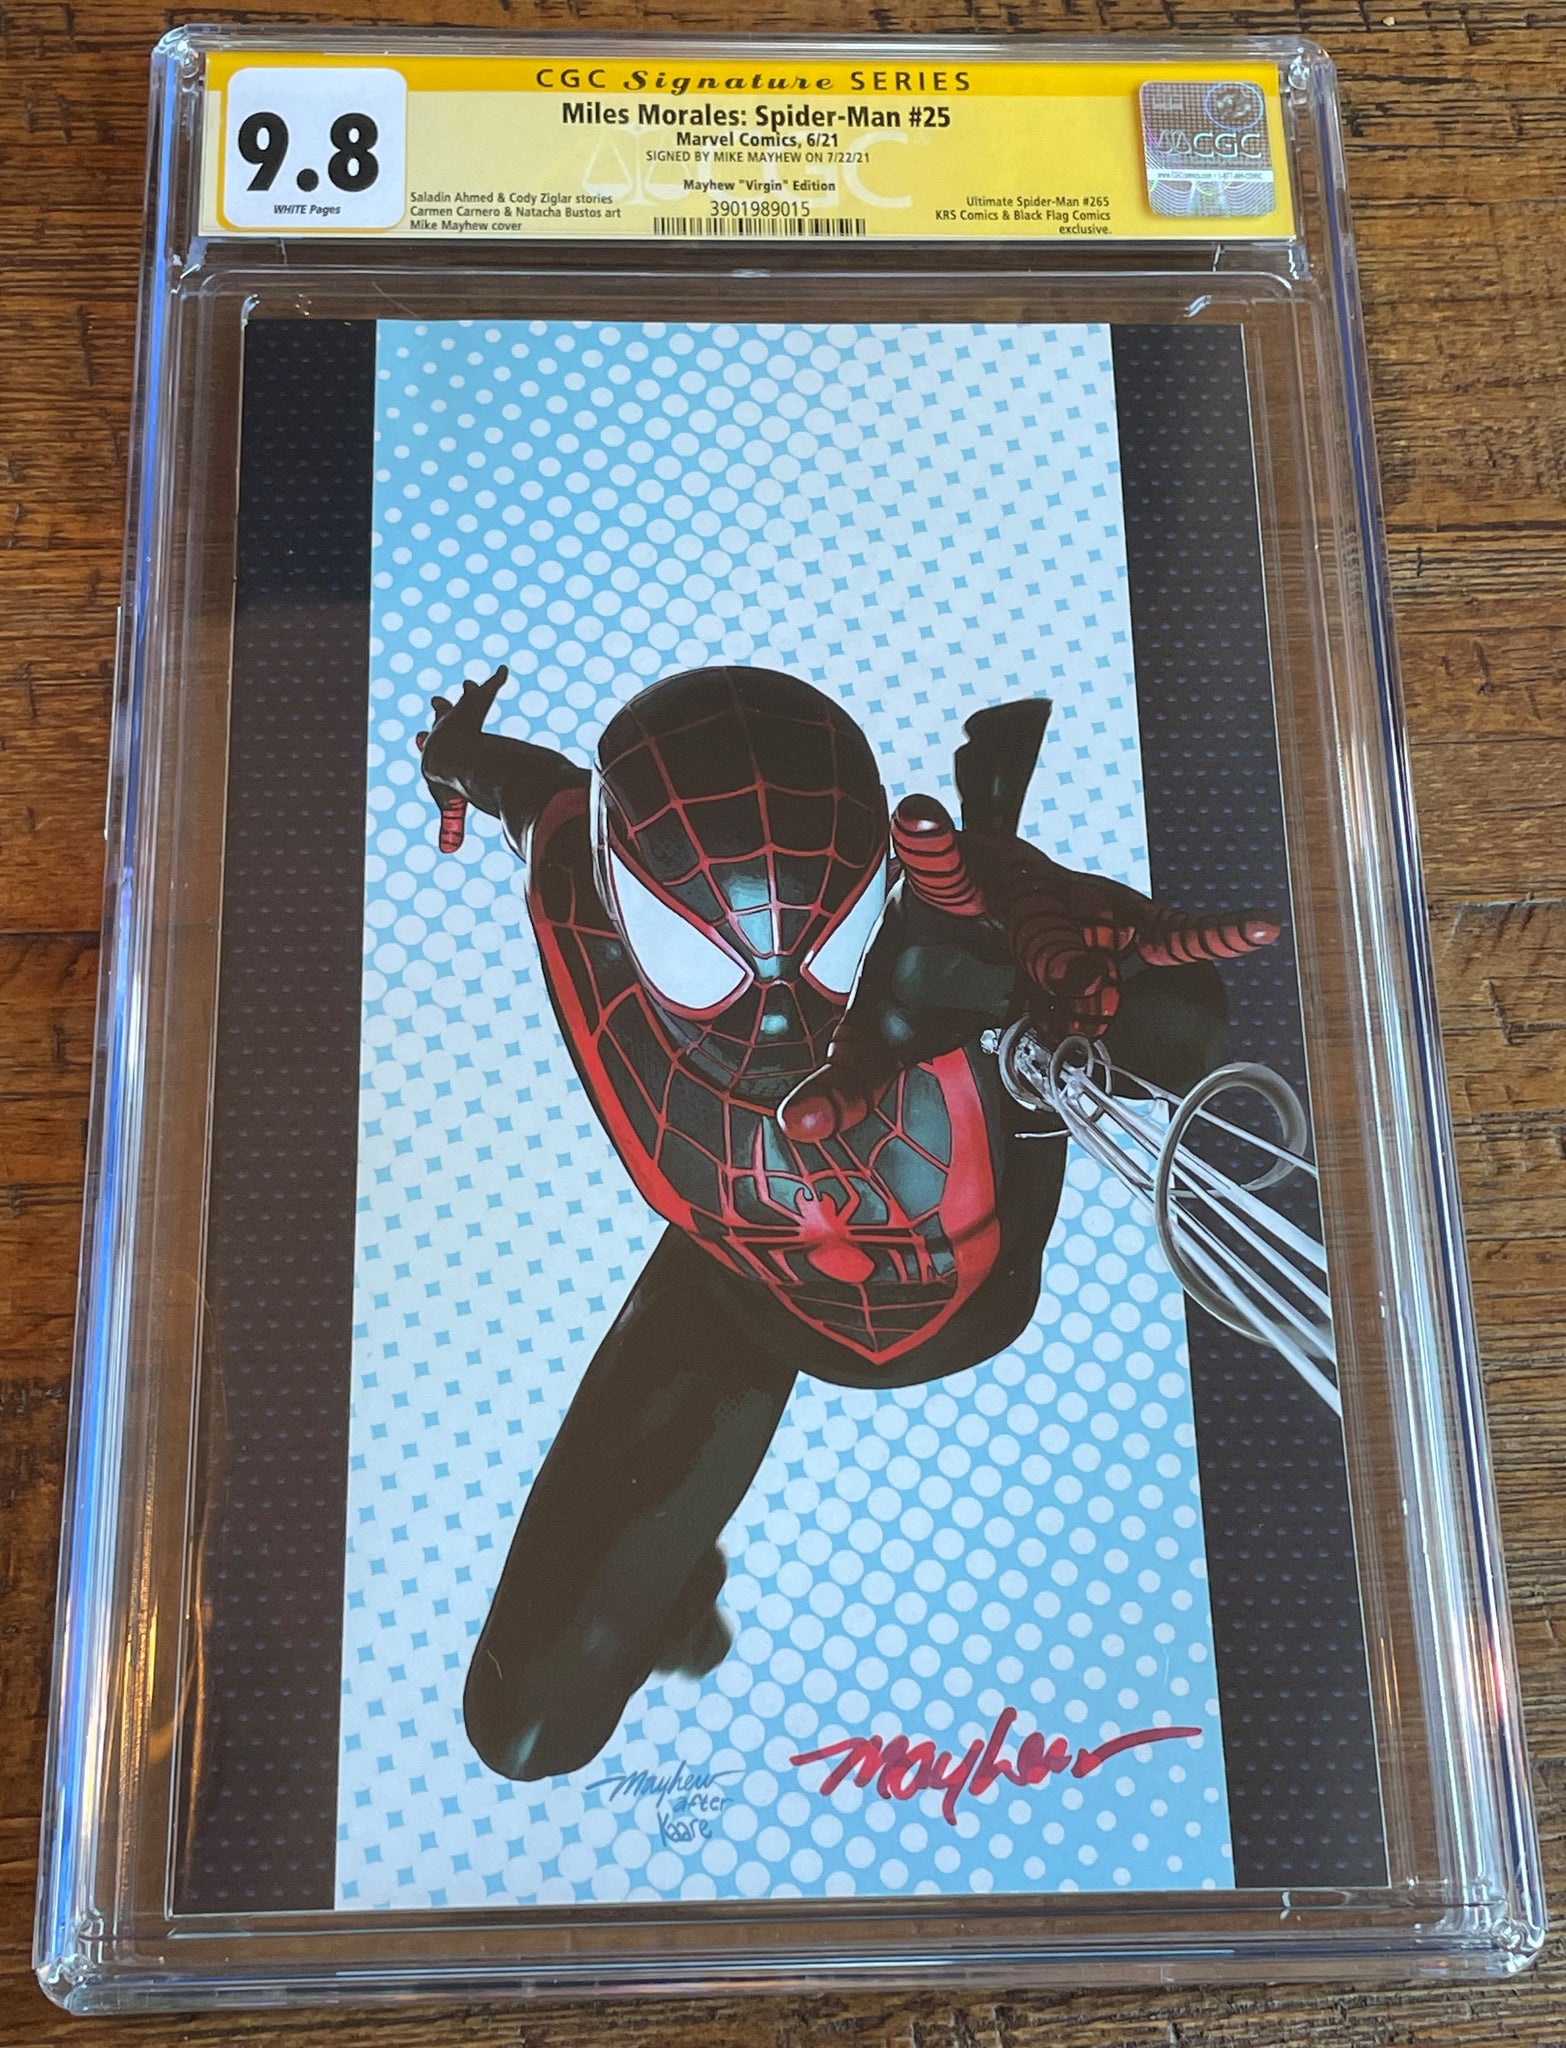 MILES MORALES SPIDER-MAN #25 CGC SS 9.8 MIKE MAYHEW SIGNED HOMAGE VIRGIN VARIANT-B